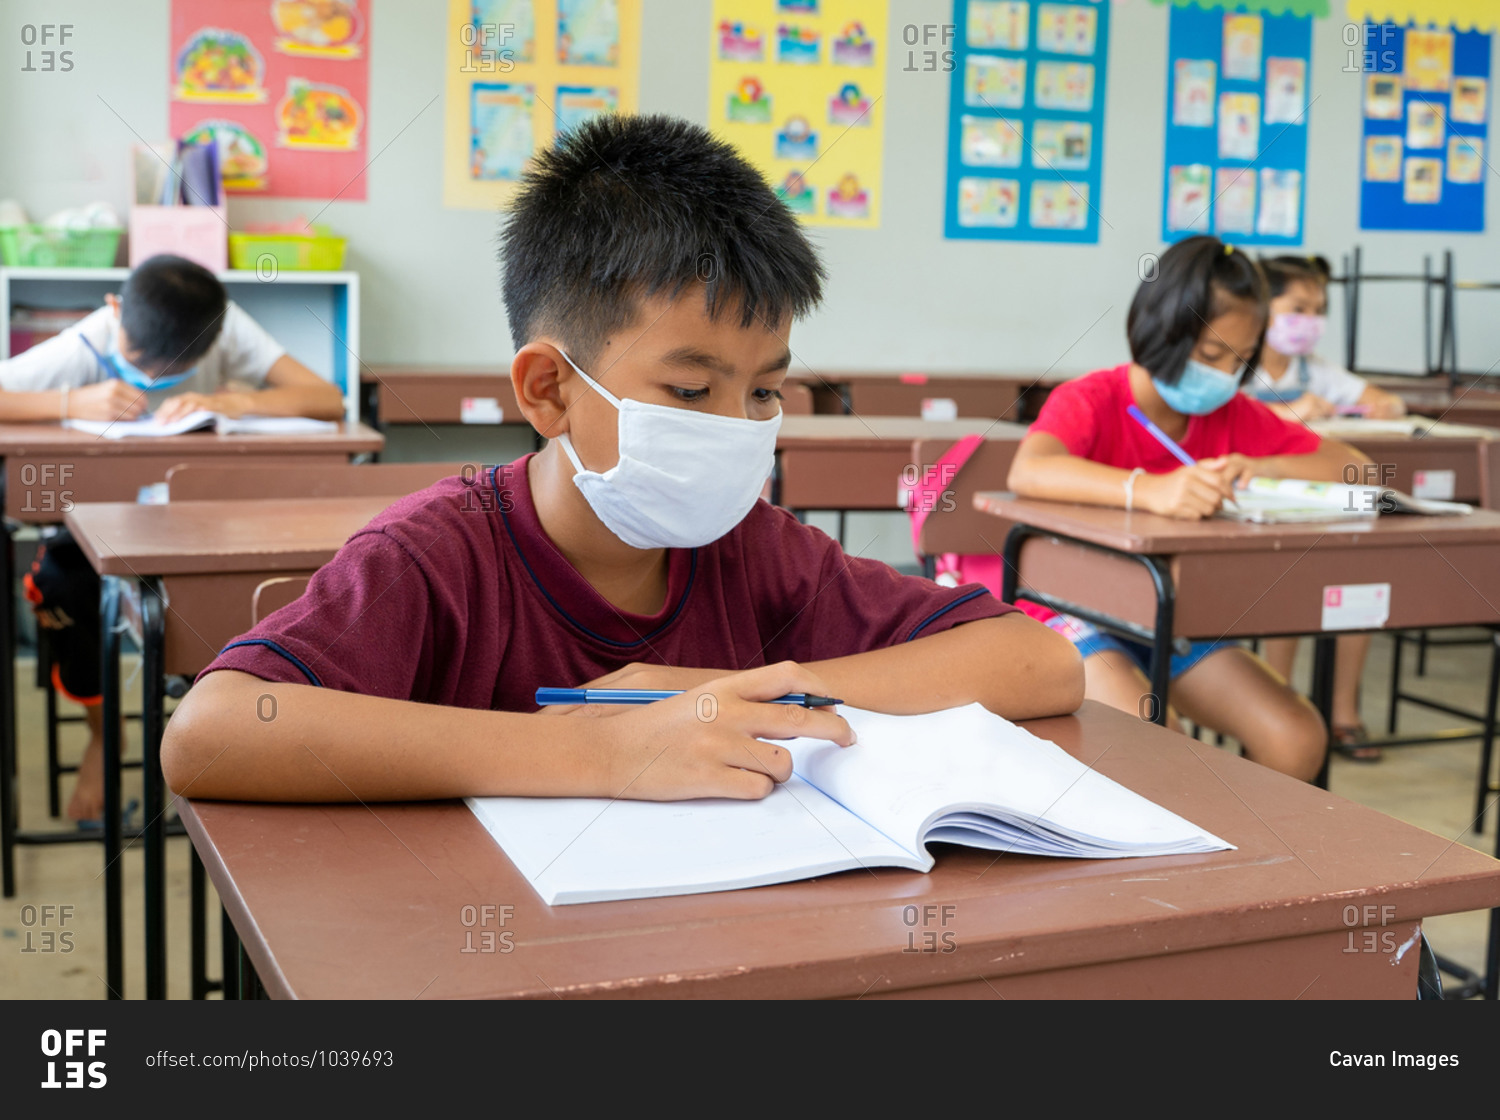 Elementary school students wearing masks study in classroom